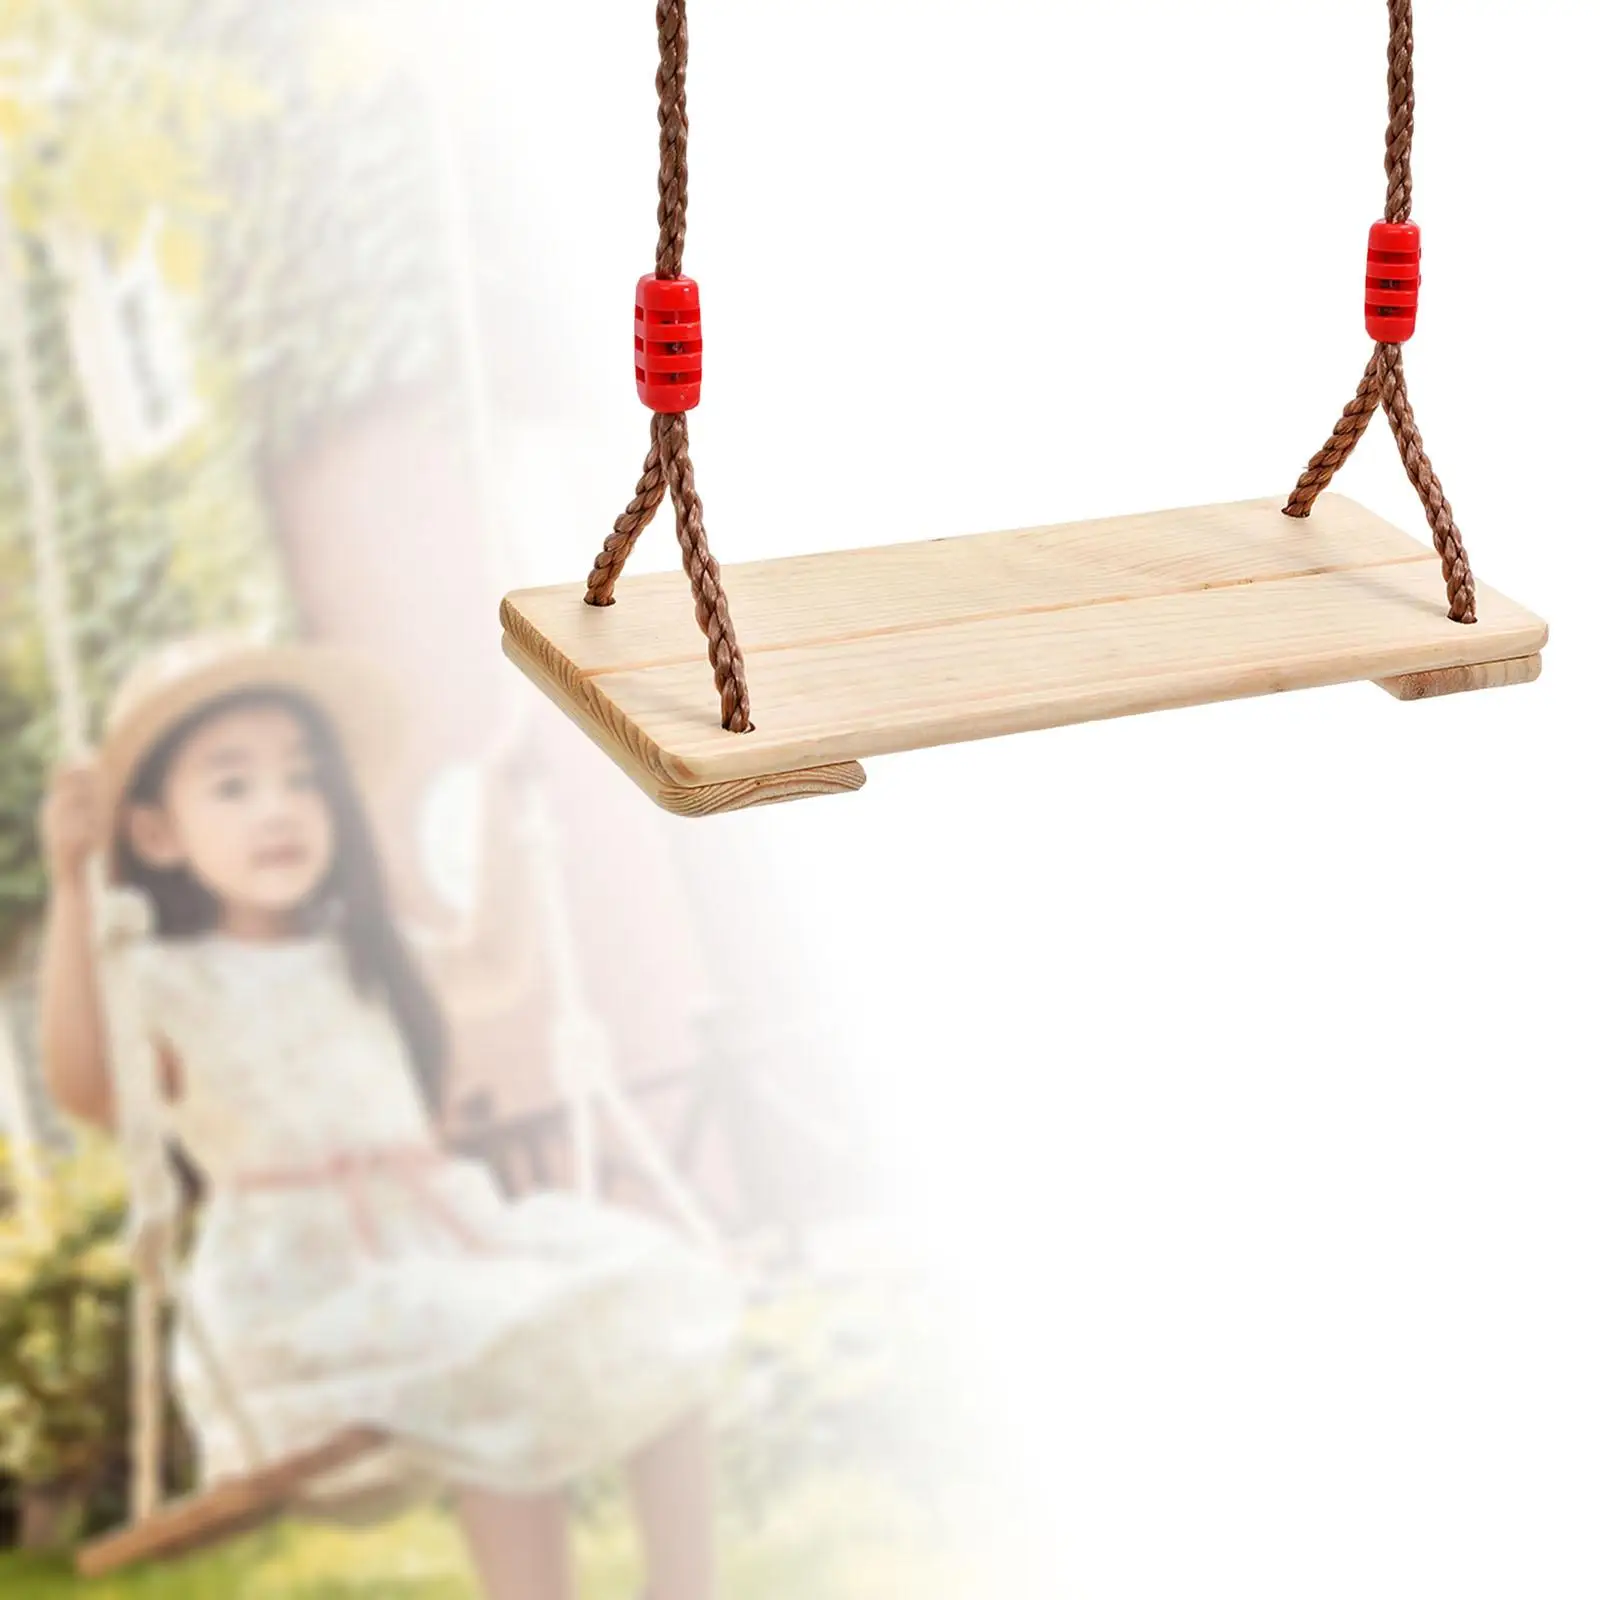 Kids Wooden Swings Garden Swing Seat Chair Toddler Toys with Rope Durable Baby Hanging Swing for Playground Backyard Garden Yard